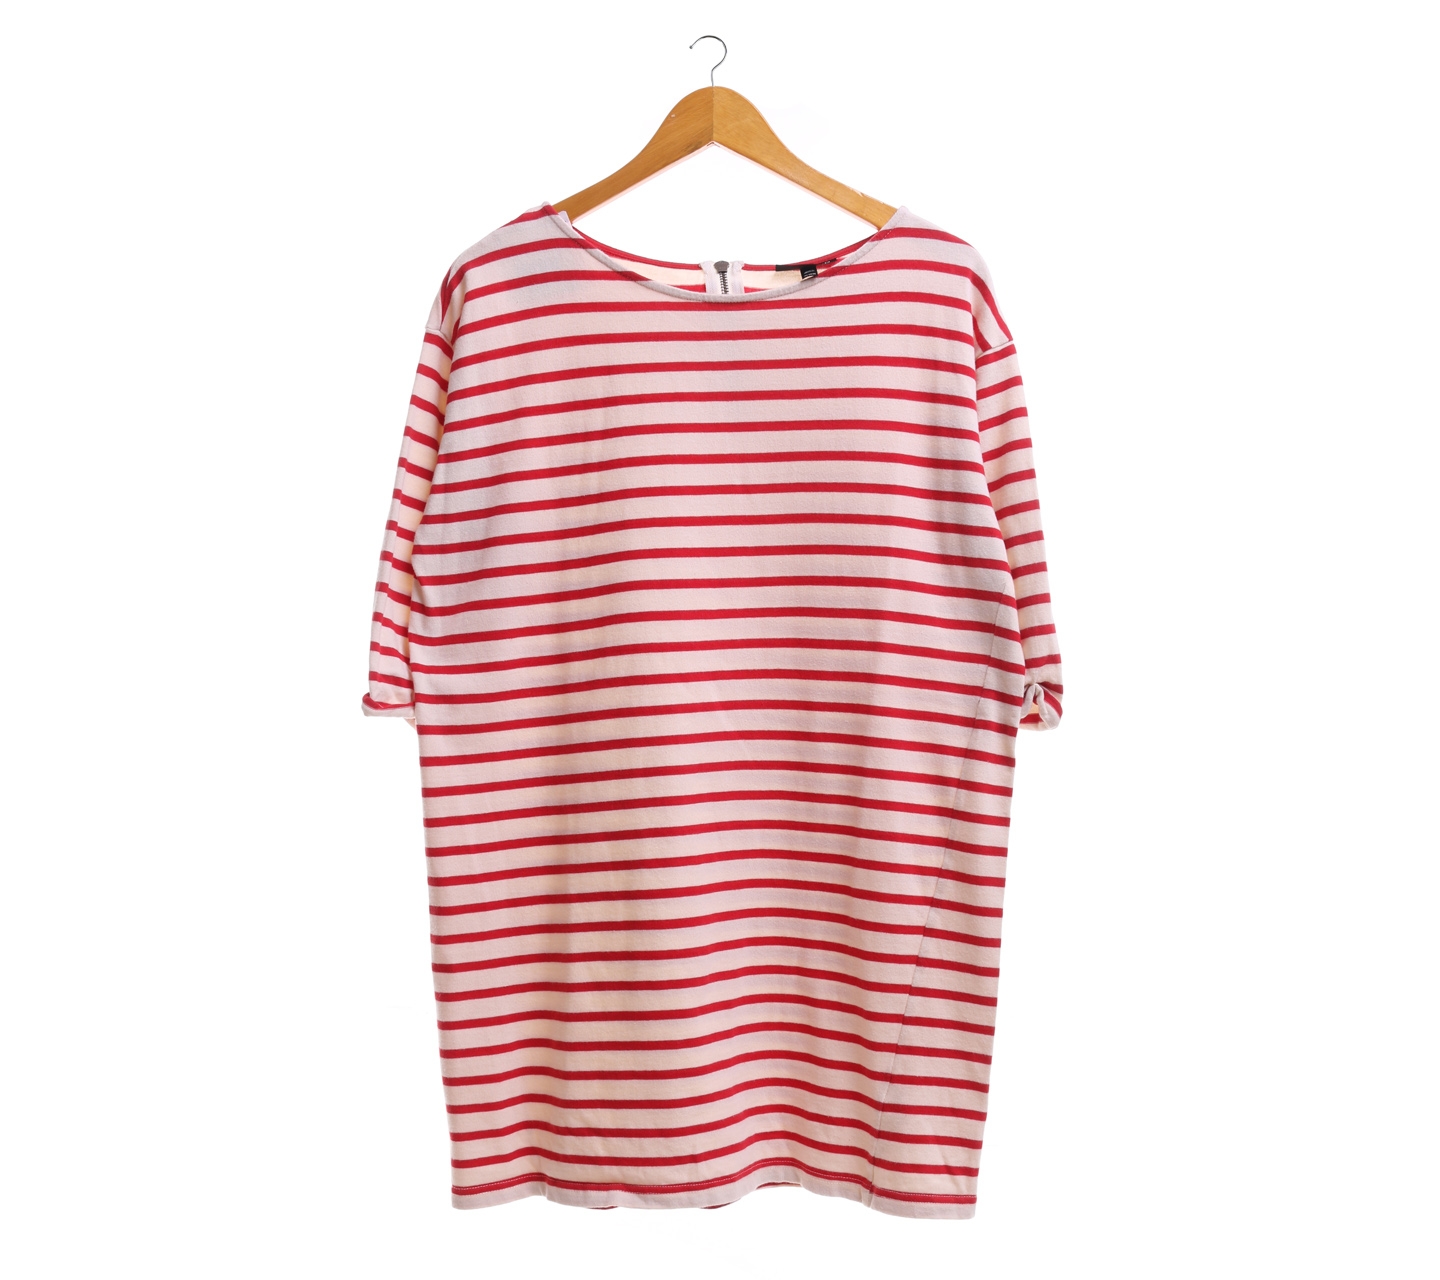 Topshop Red And Cream Striped Blouse